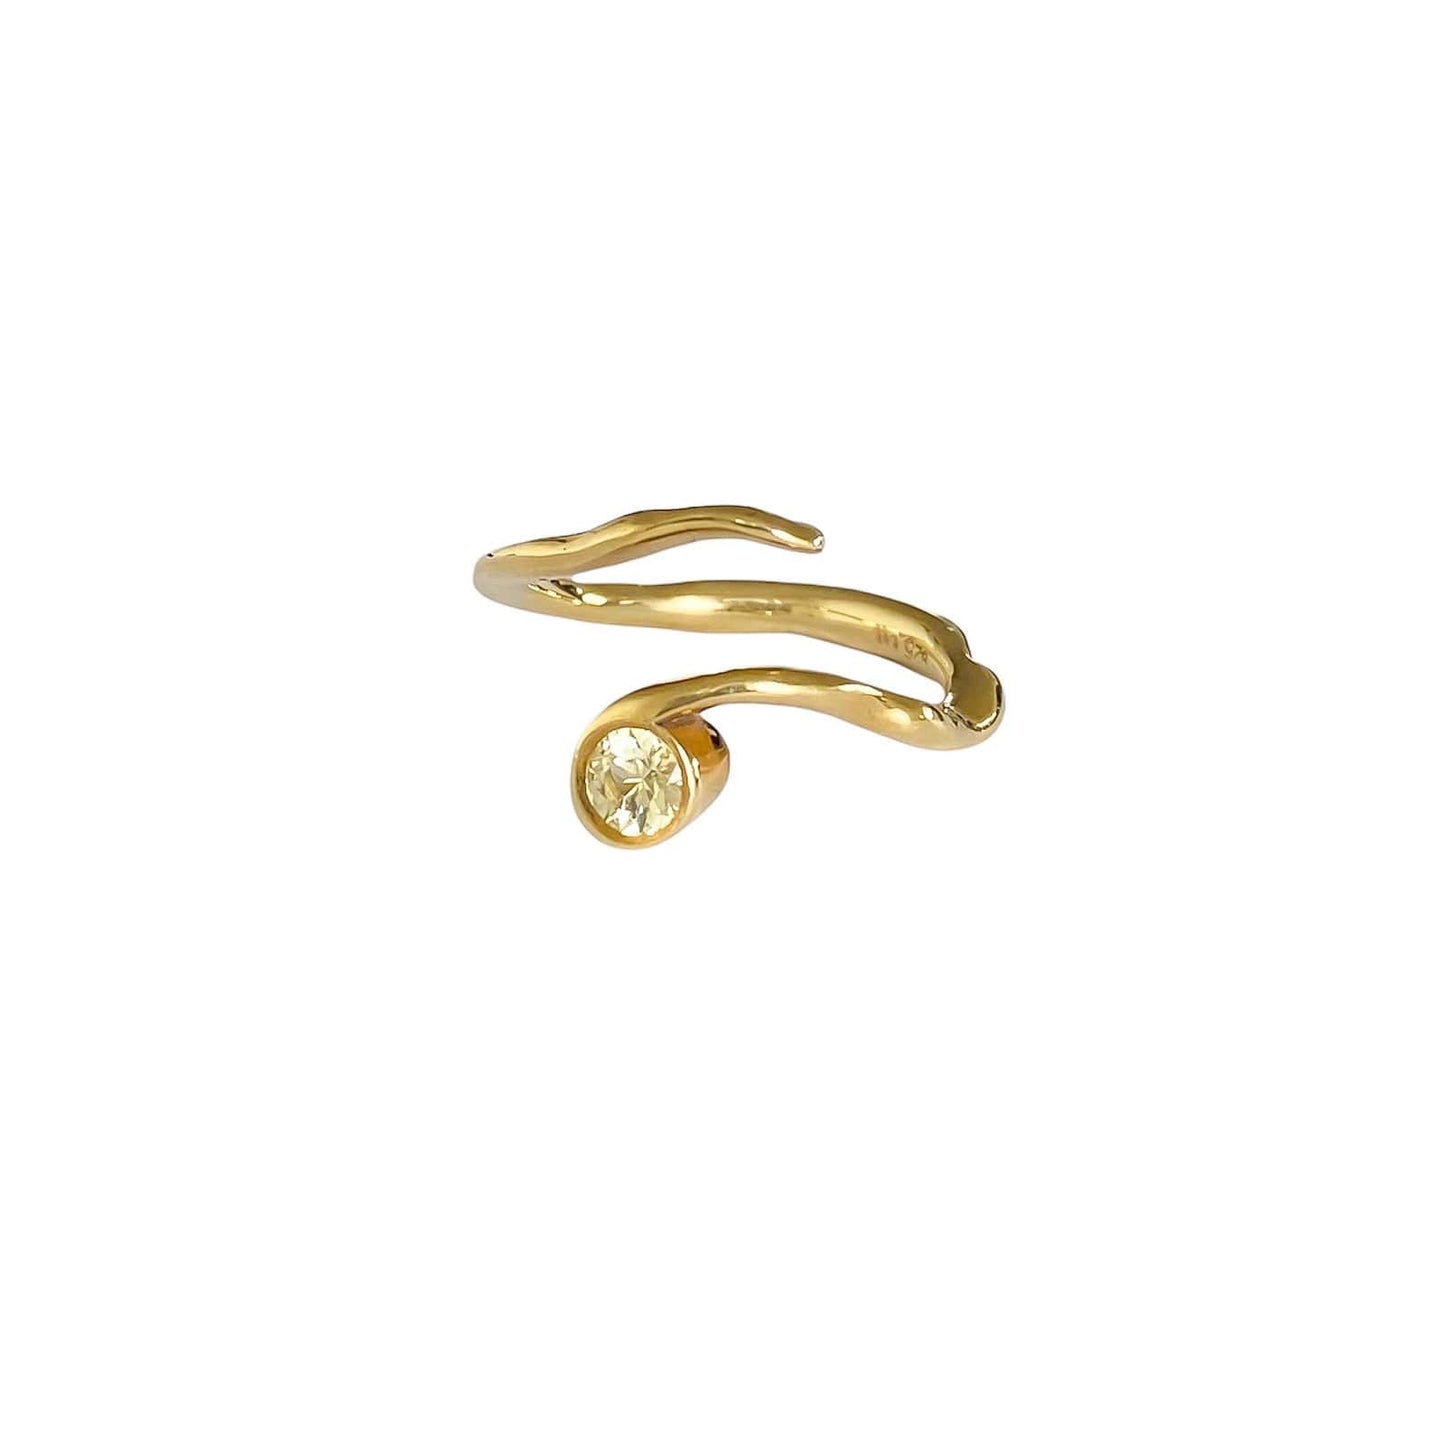 Simone Noa Spirulina gold plated silver sapphire ring, front view.